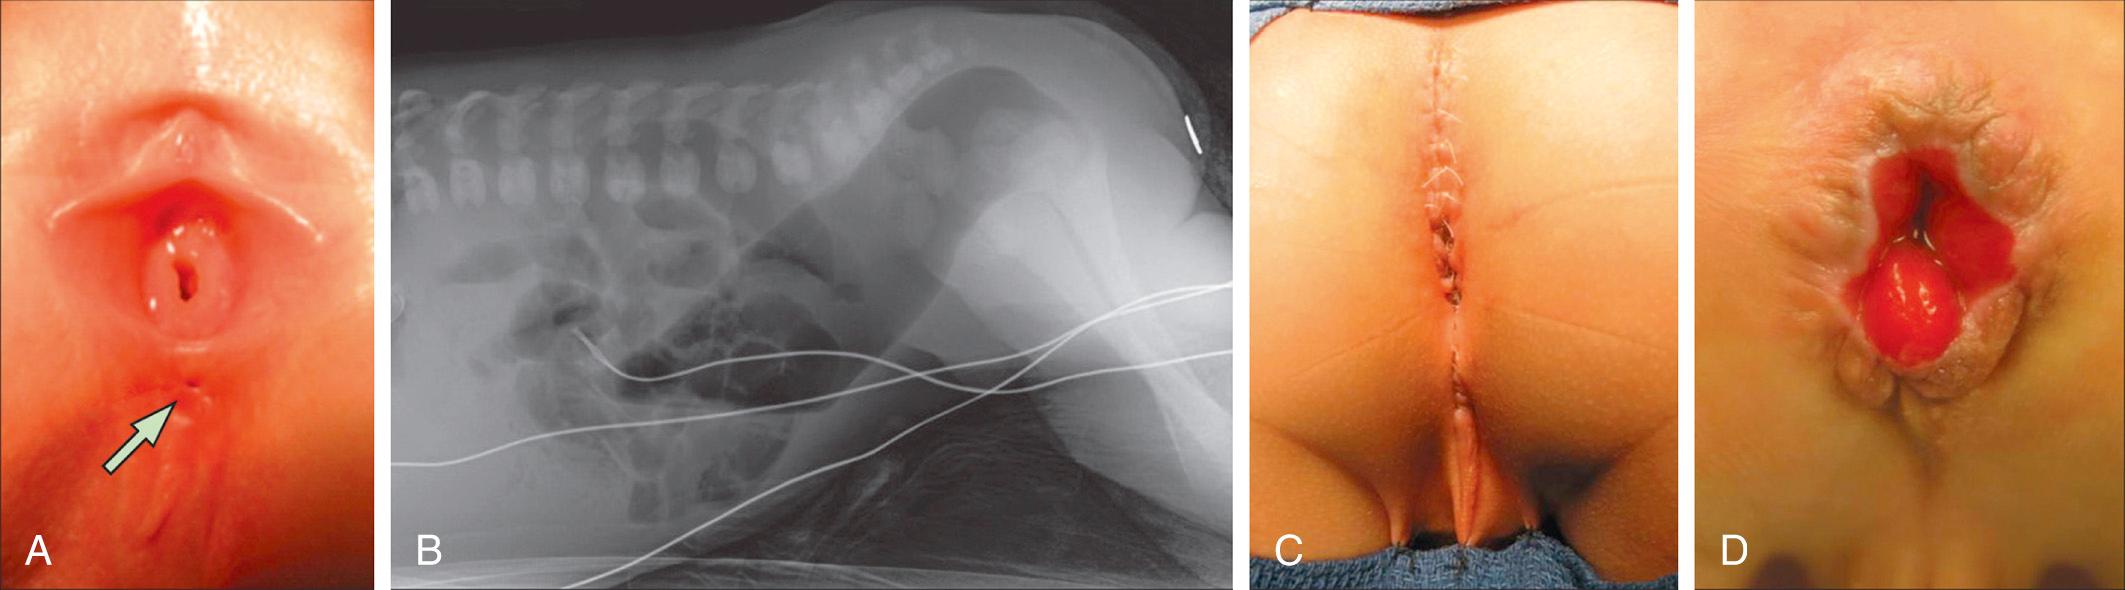 Fig. 371.4, Preoperative and postoperative images of anorectal malformations.